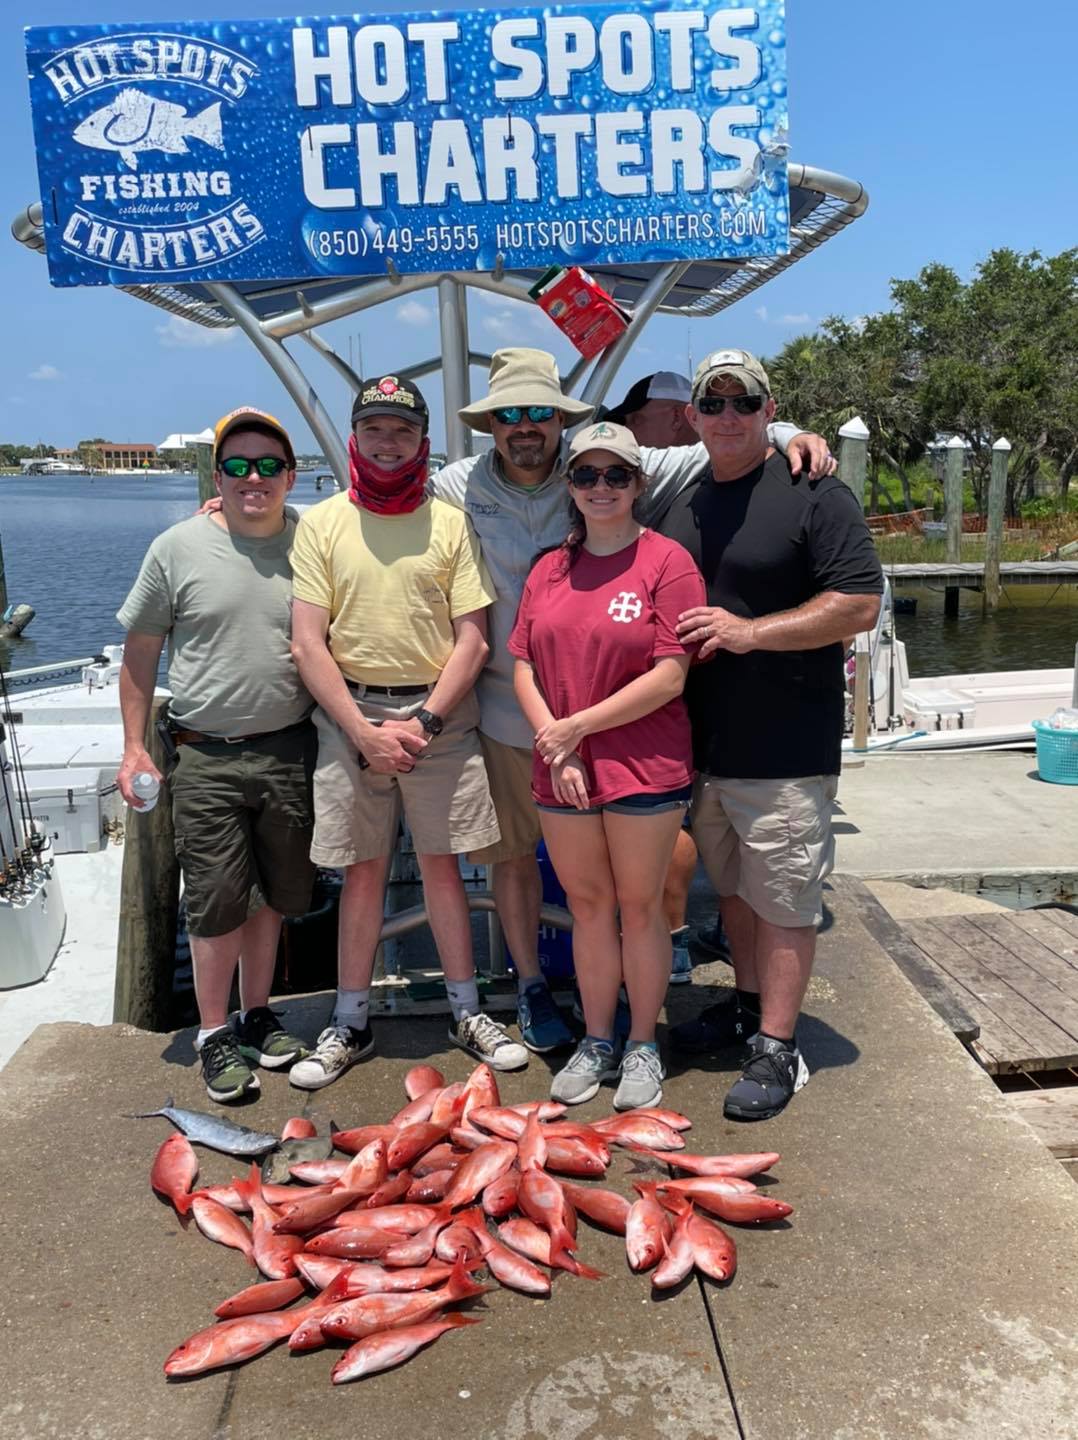 Hot Spots Charters Offers Inshore and Offshore Fishing Trips All Year Round